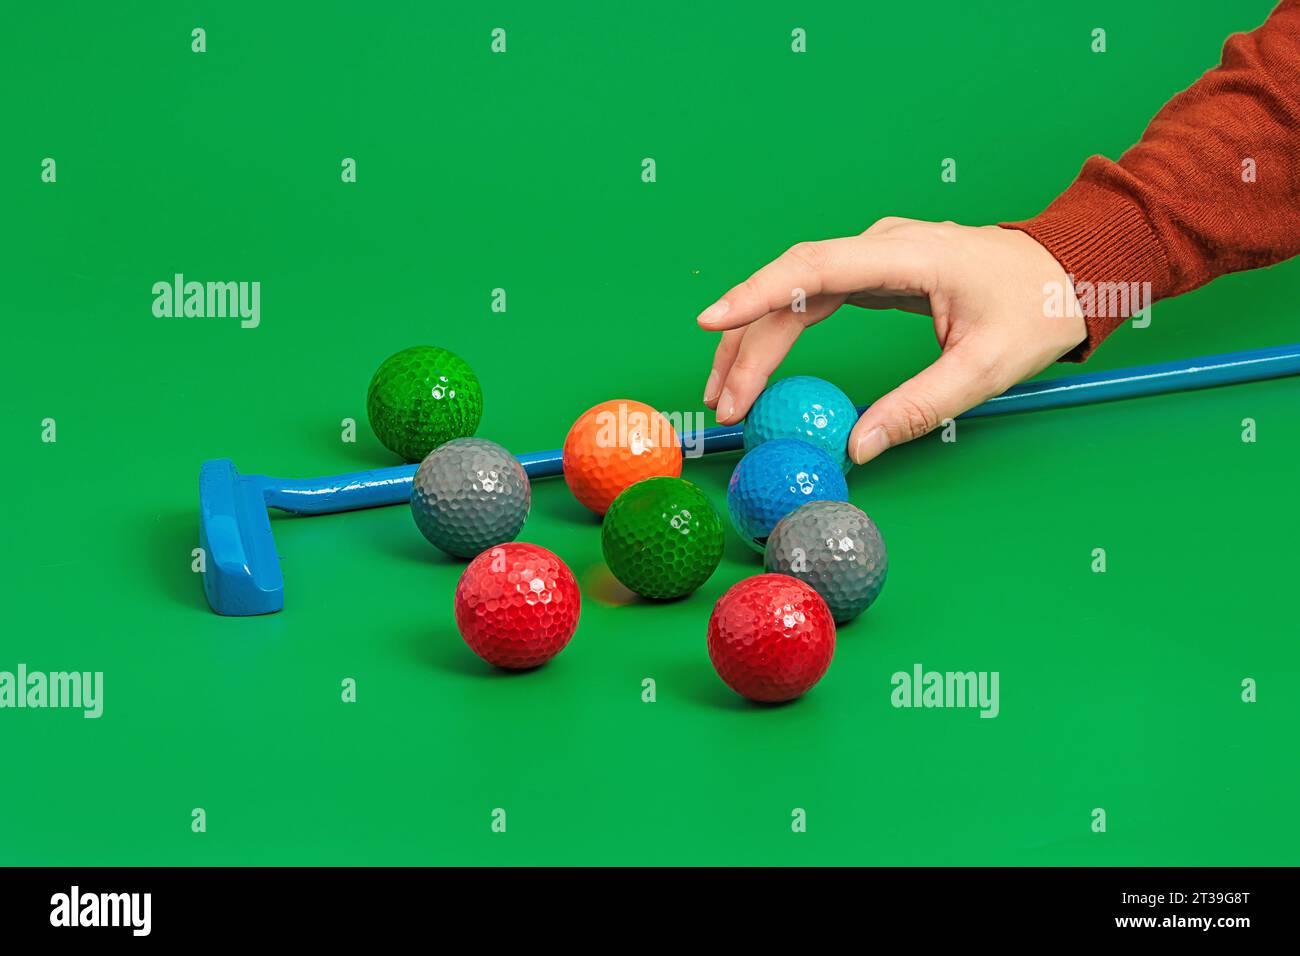 Crop hand putting ball into mini golf set on green surface in studio with golf stick and with various balls Stock Photo